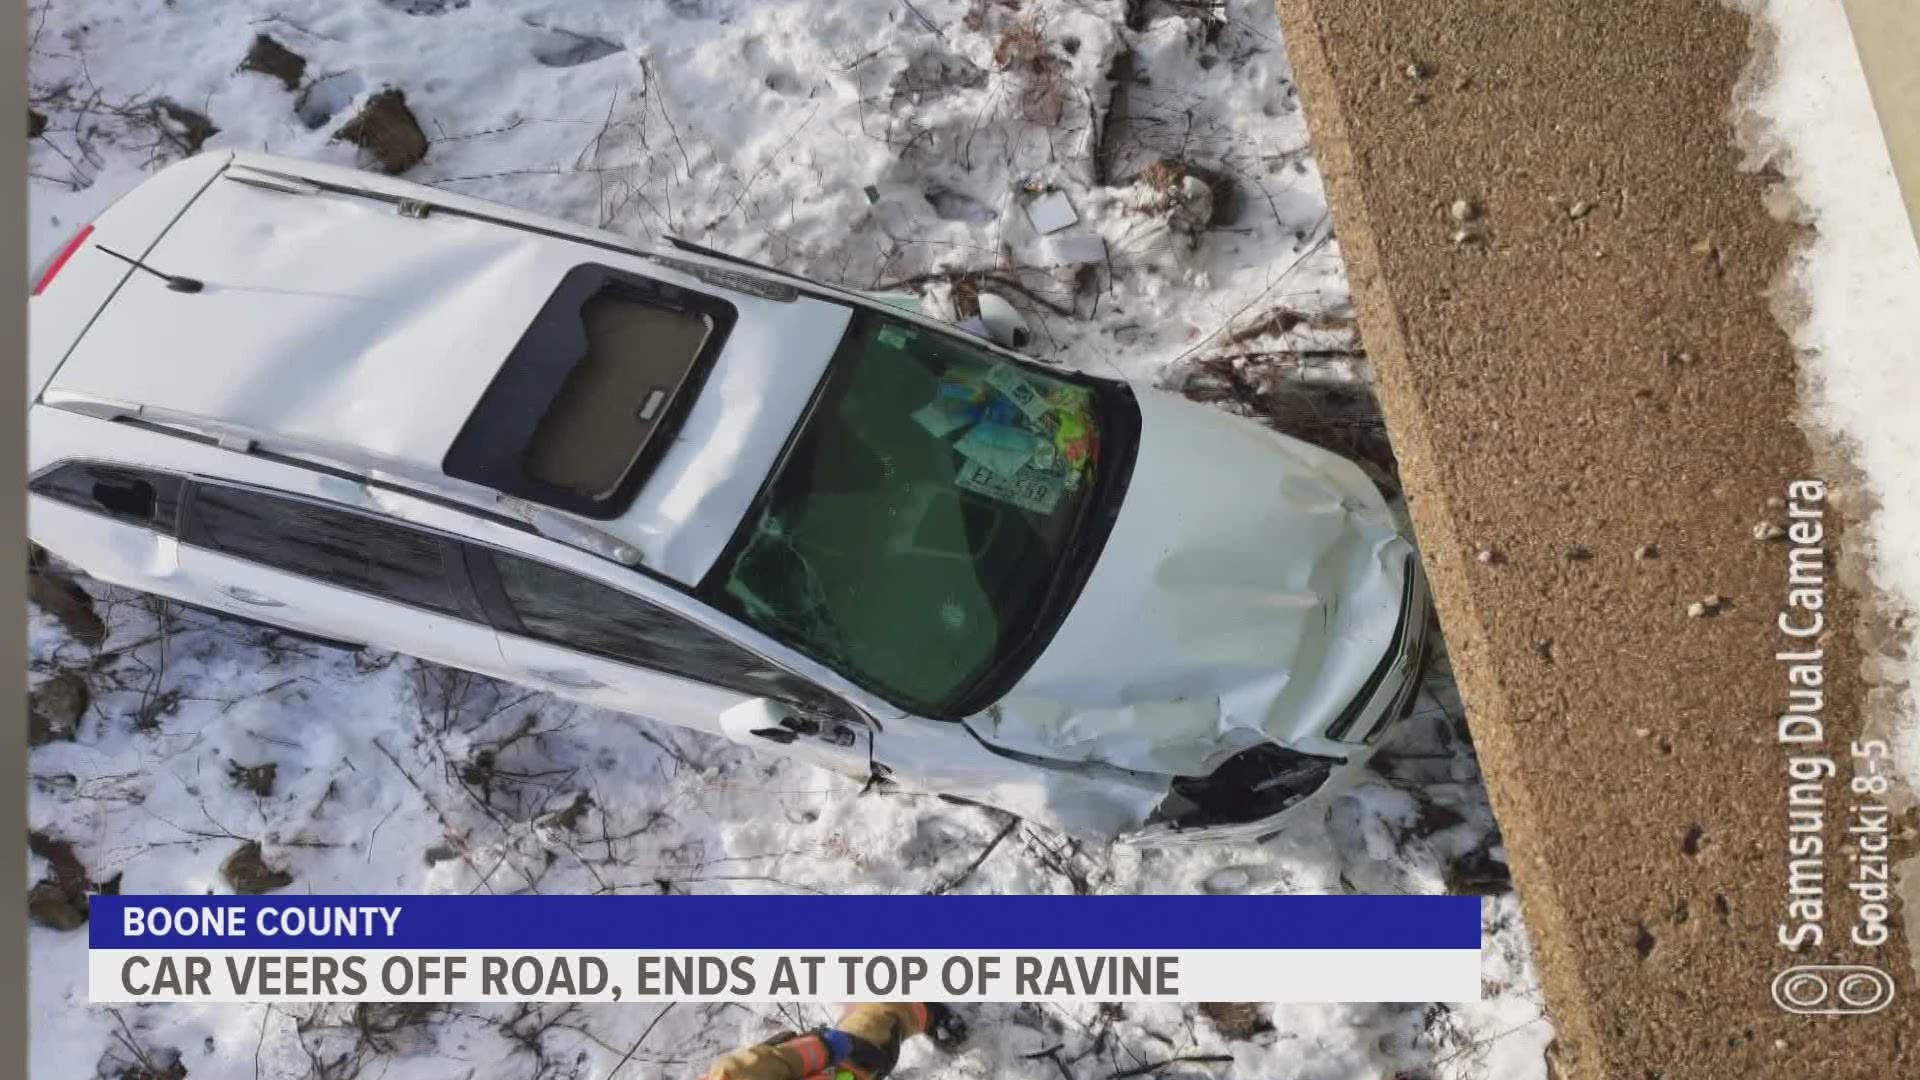 The Boone County Sheriff's Office responded to a crash just before 2 p.m. Wednesday that left a car on a ravine over the Des Moines River.